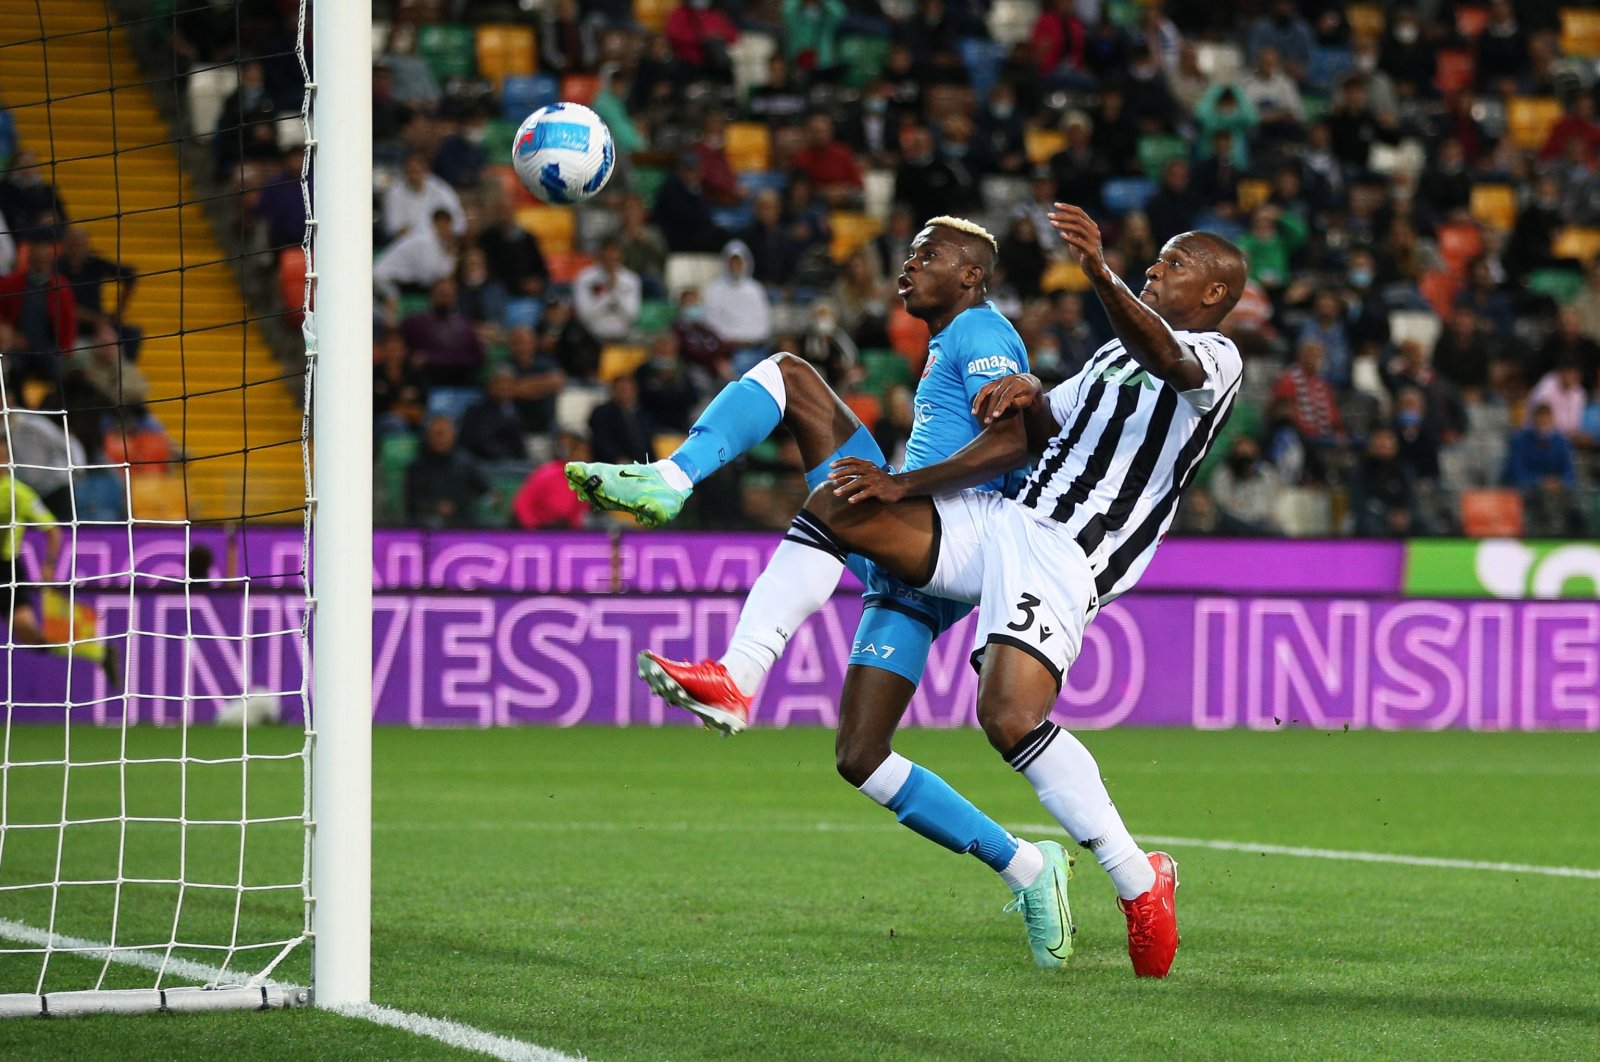 Napoli’s Victor Osimhen (L) scores under pressure from Udinese's Samir during a Serie A match in Udine, Italy, Sept. 20, 2021. (EPA Photo)